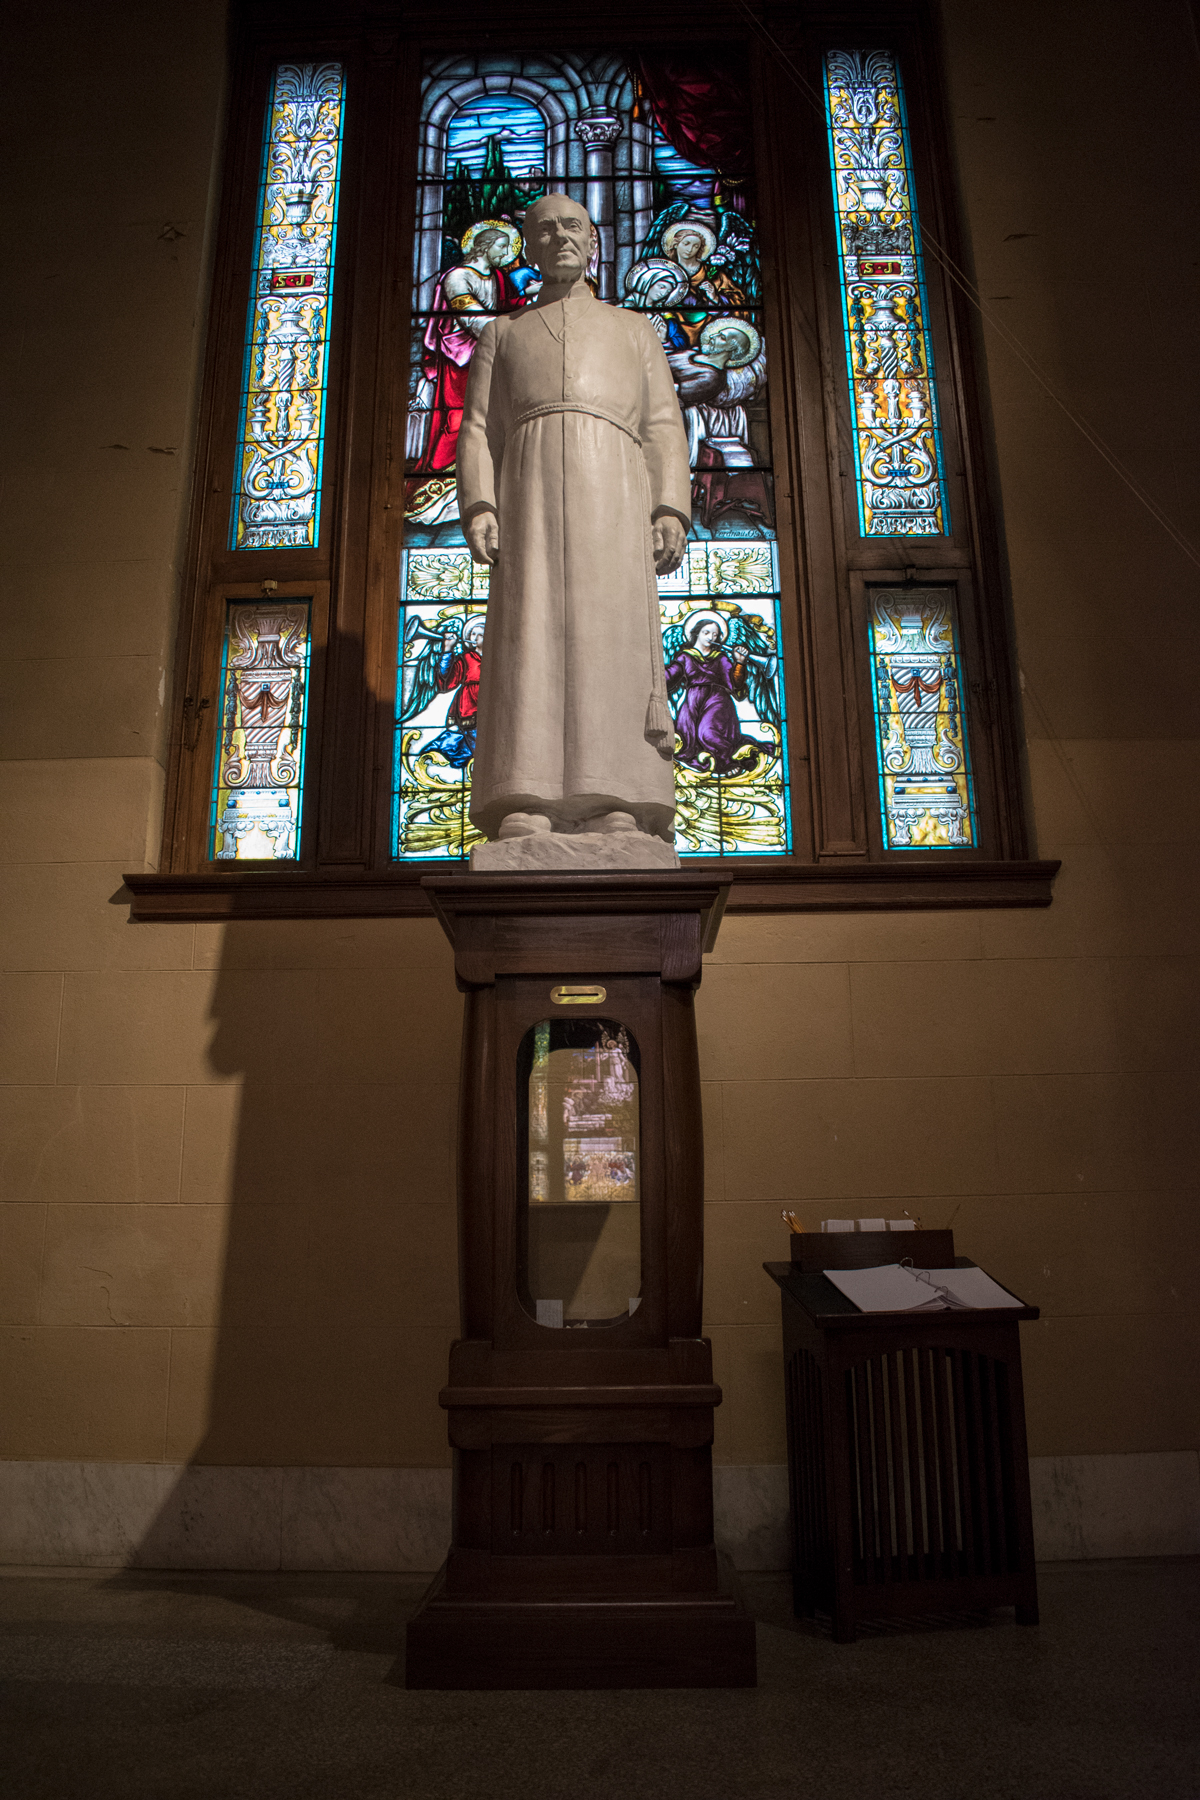 Statue of Saint Brother André in the Crypt Church at Saint Joseph's Oratory, November 2017